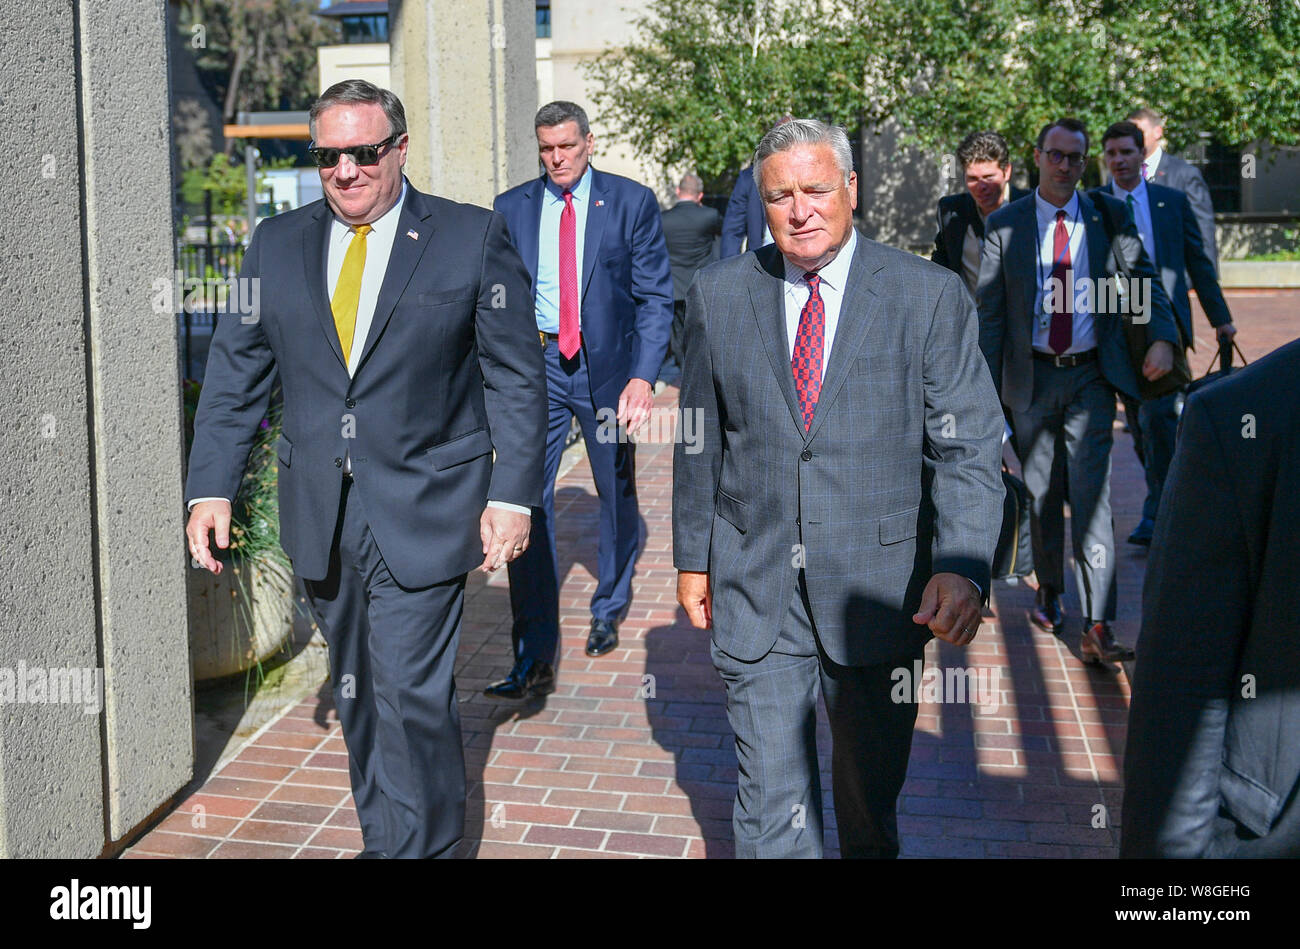 U.S. Secretary of State Michael R. Pompeo is greeted by Hoover Institution Director Thomas Gilligan upon arrival to the Hoover Institution at Stanford Stock Photo